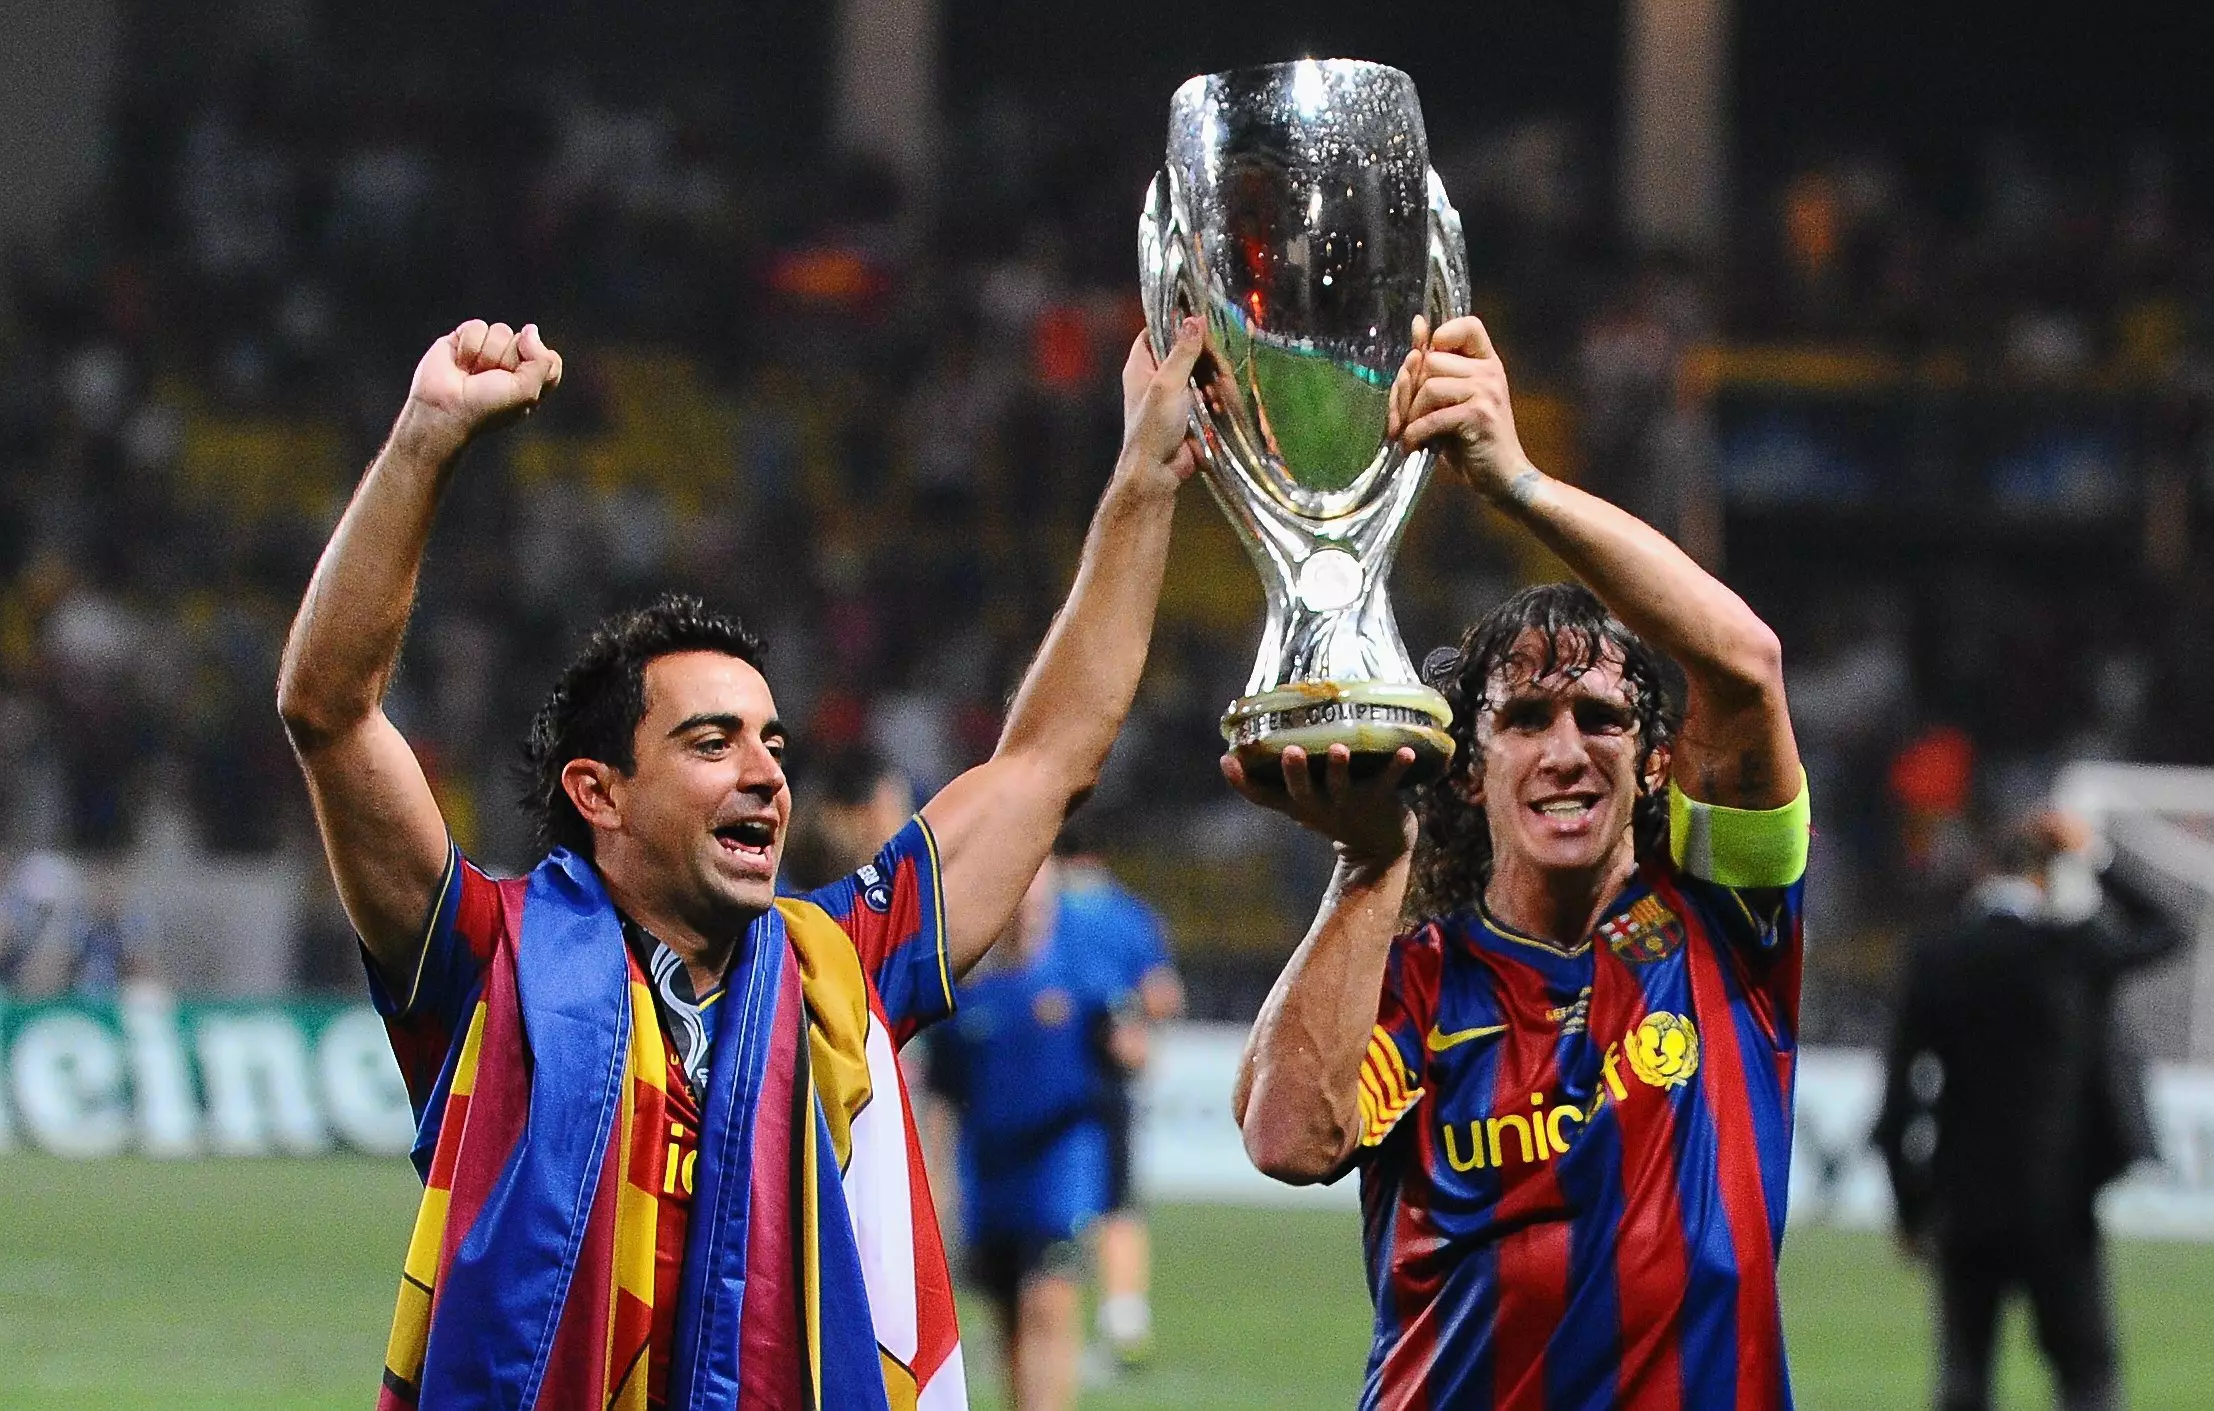 Puyol lifts the European Super Cup. Image: PA Images